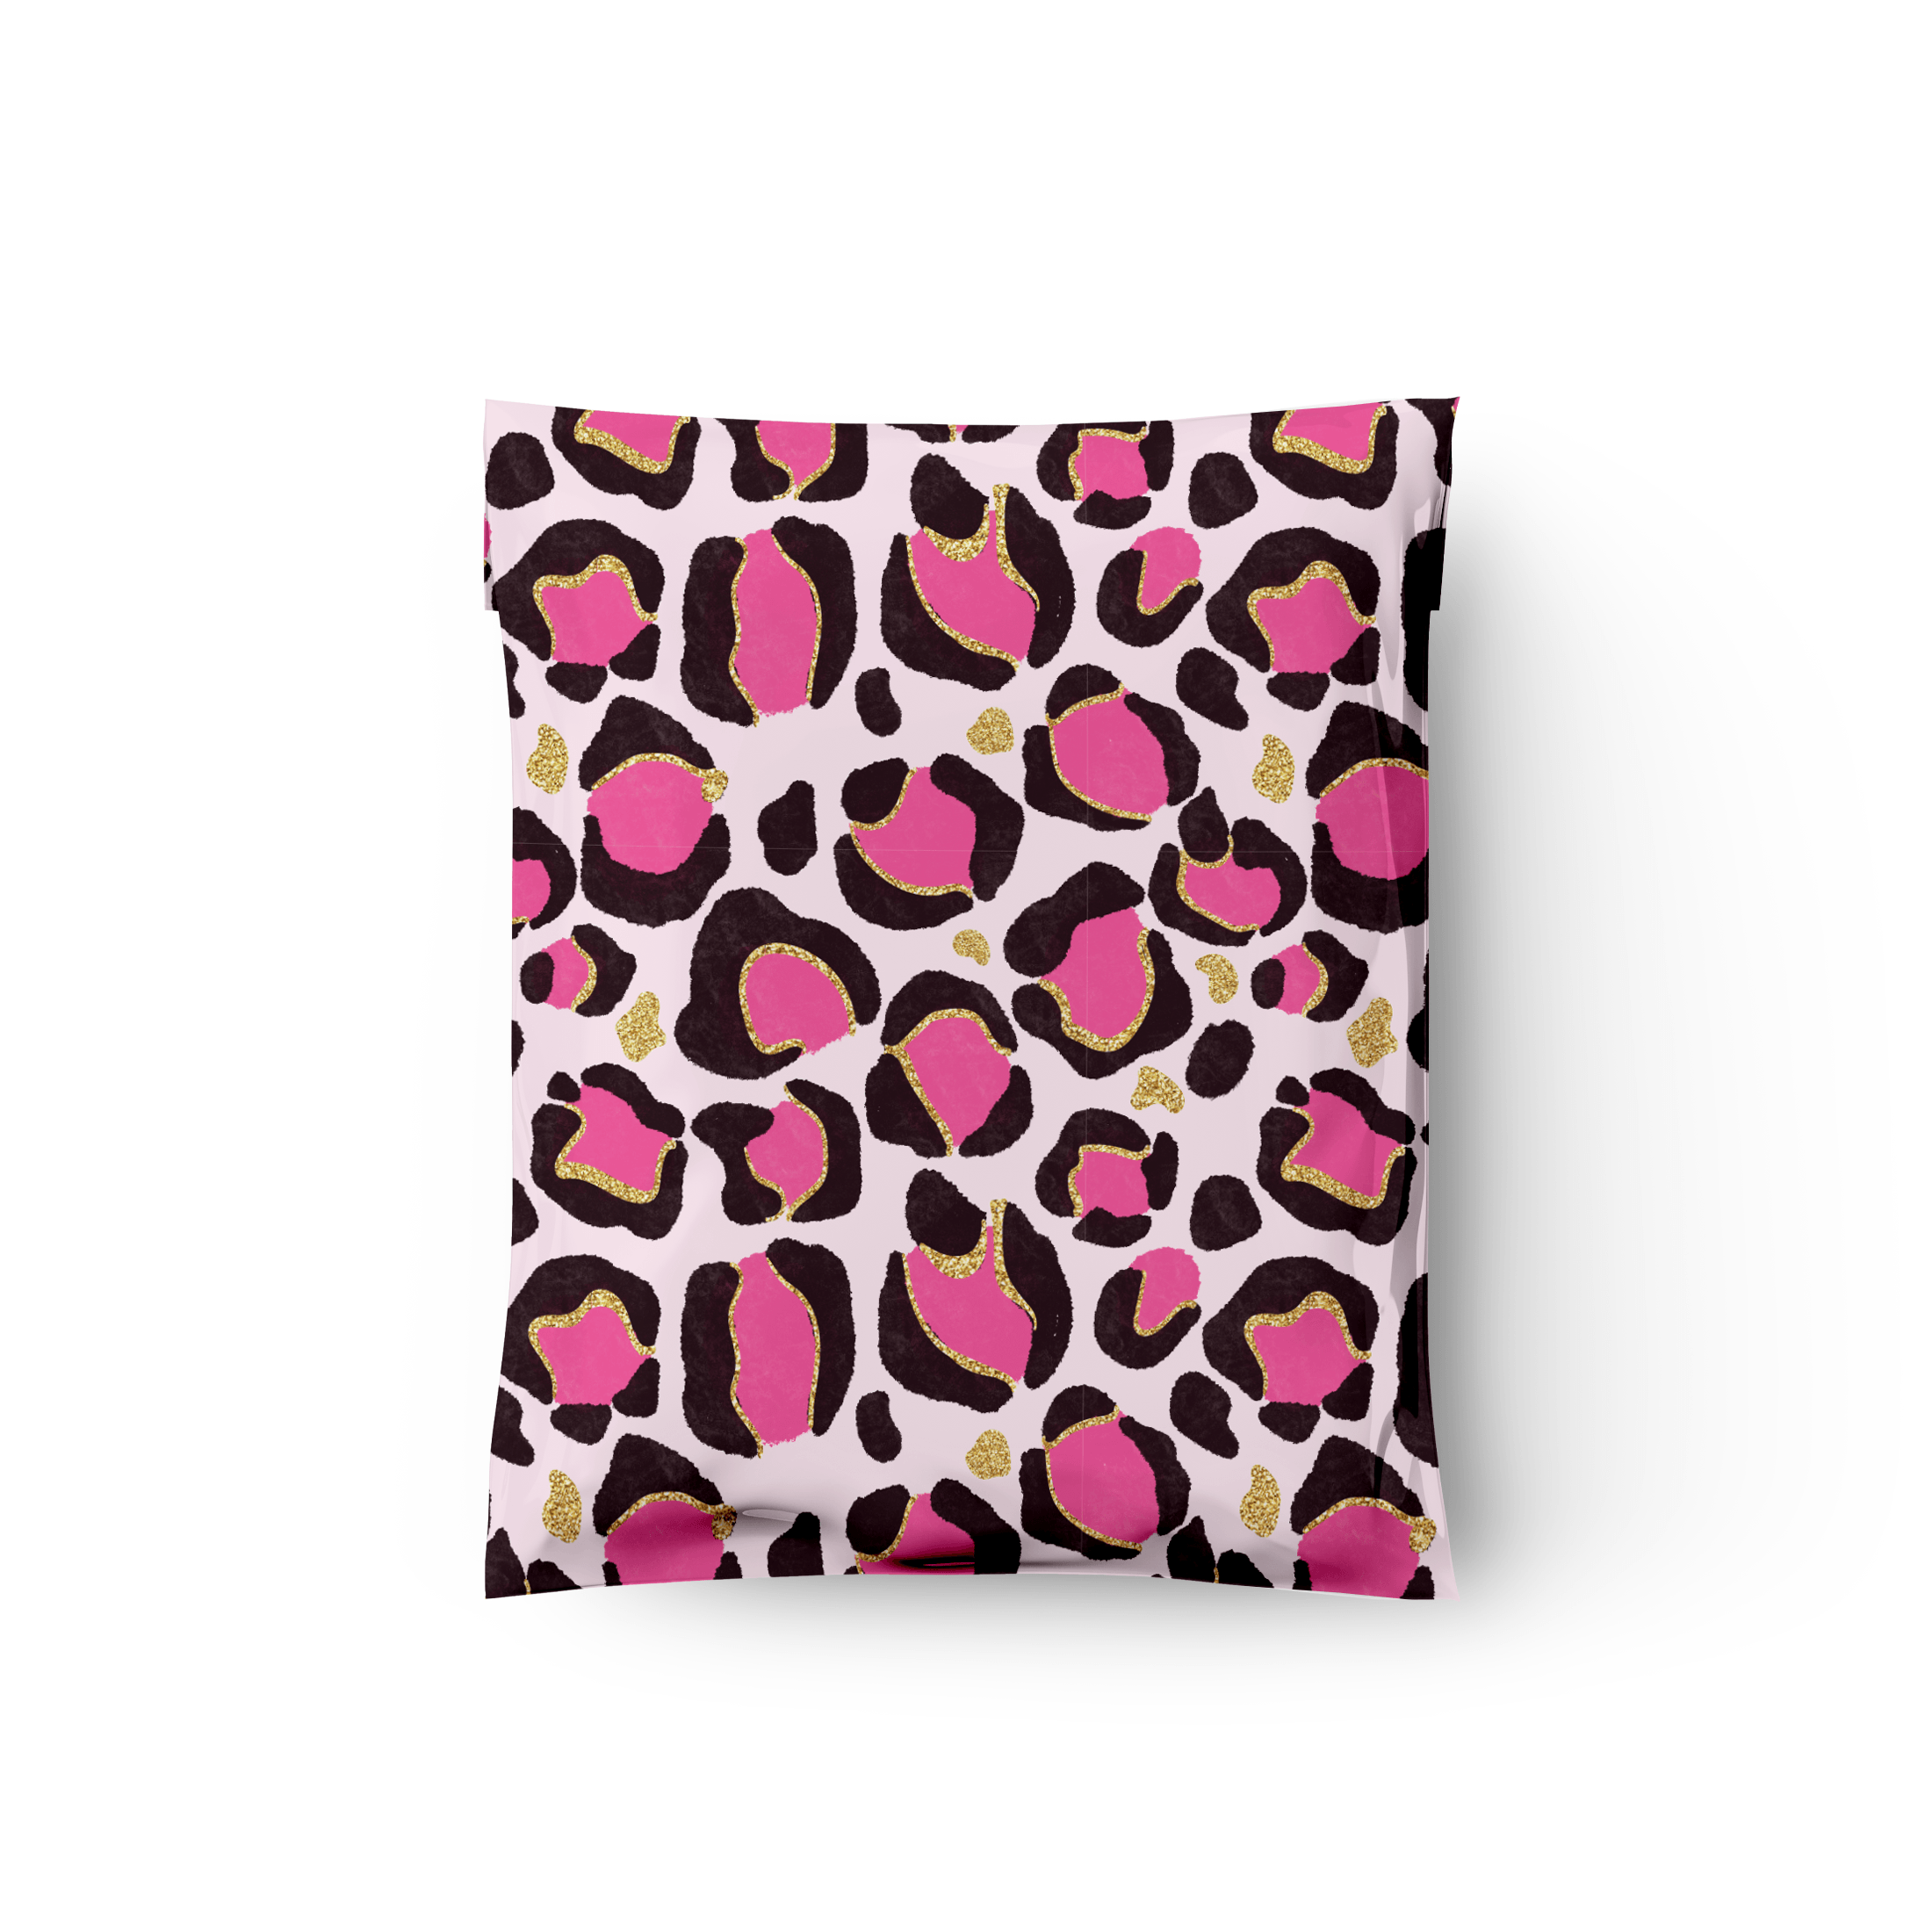 12x15" Pink Leopard Print Designer Poly Mailers Shipping Envelopes Premium Printed Bags - Pro Supply Global